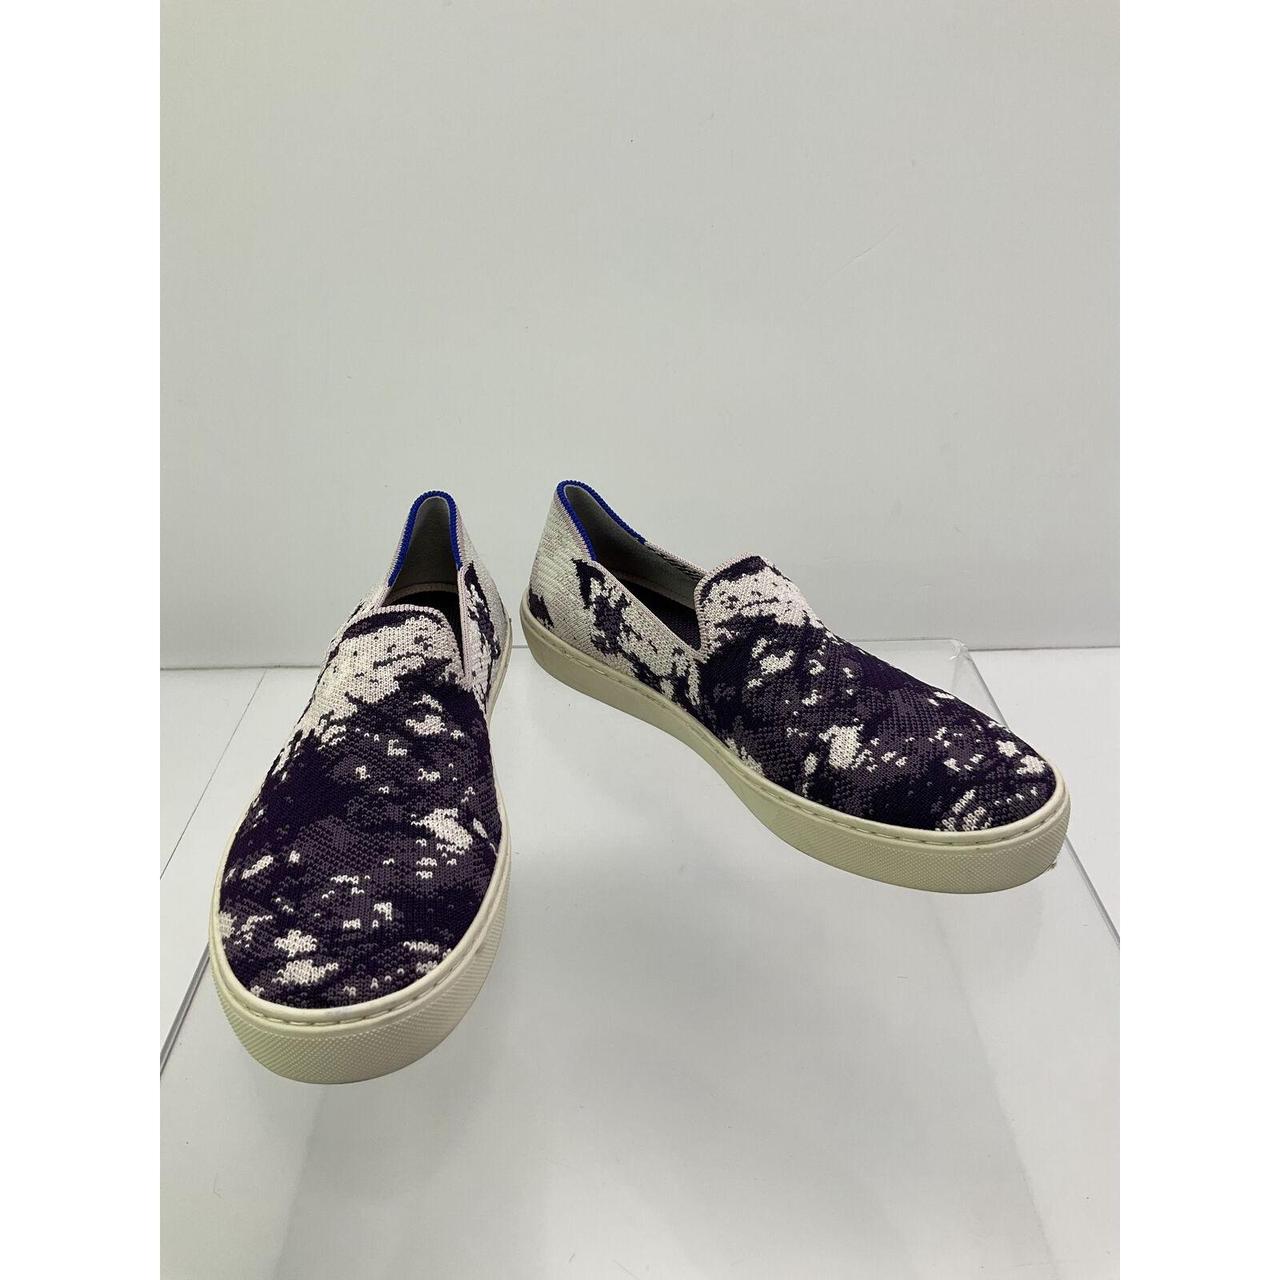 Rothy's Women's White and Purple Trainers | Depop